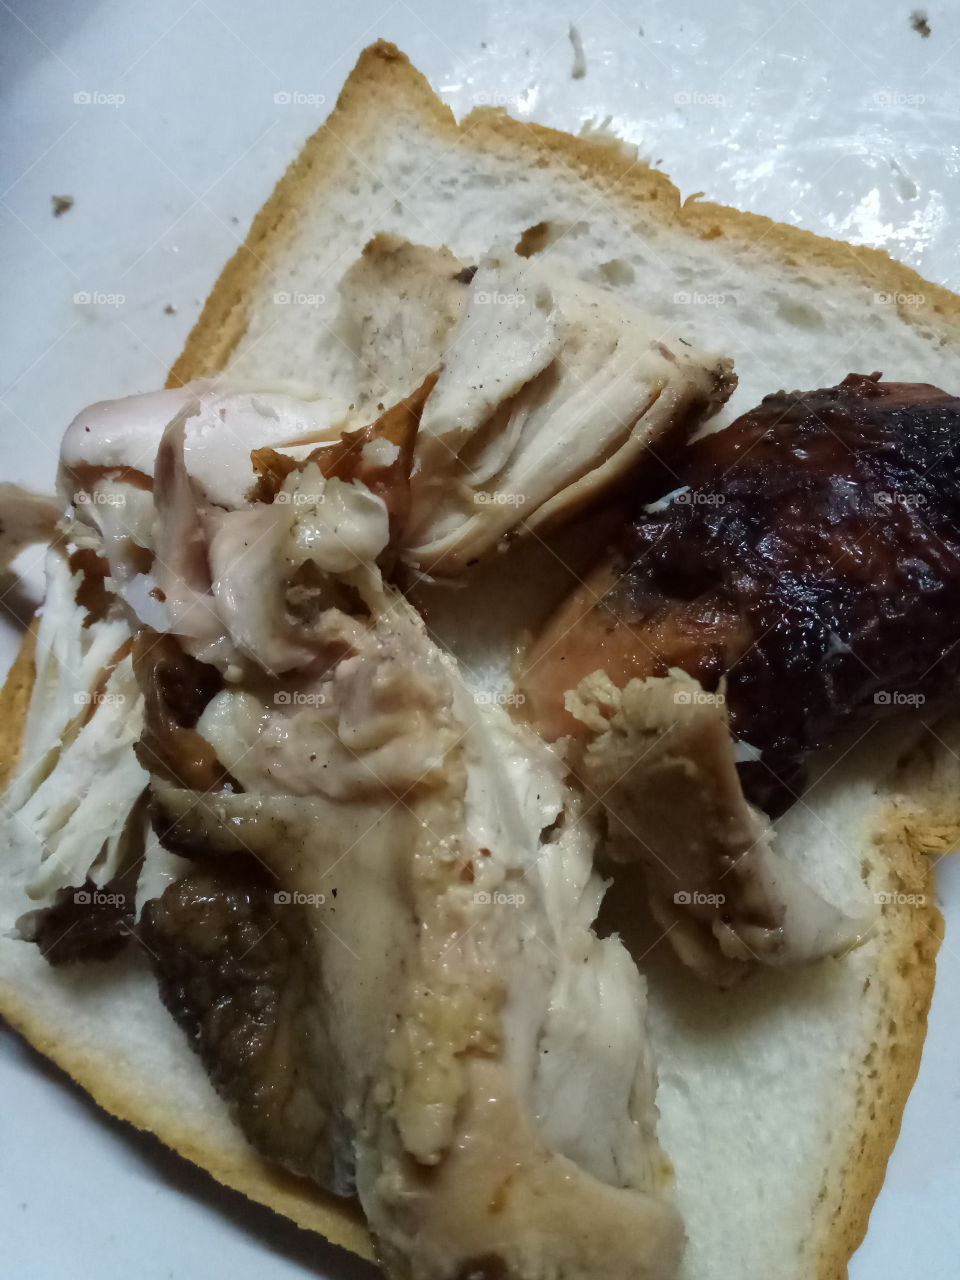 yummy,crispy and very delicious roasted chicken sandwich.